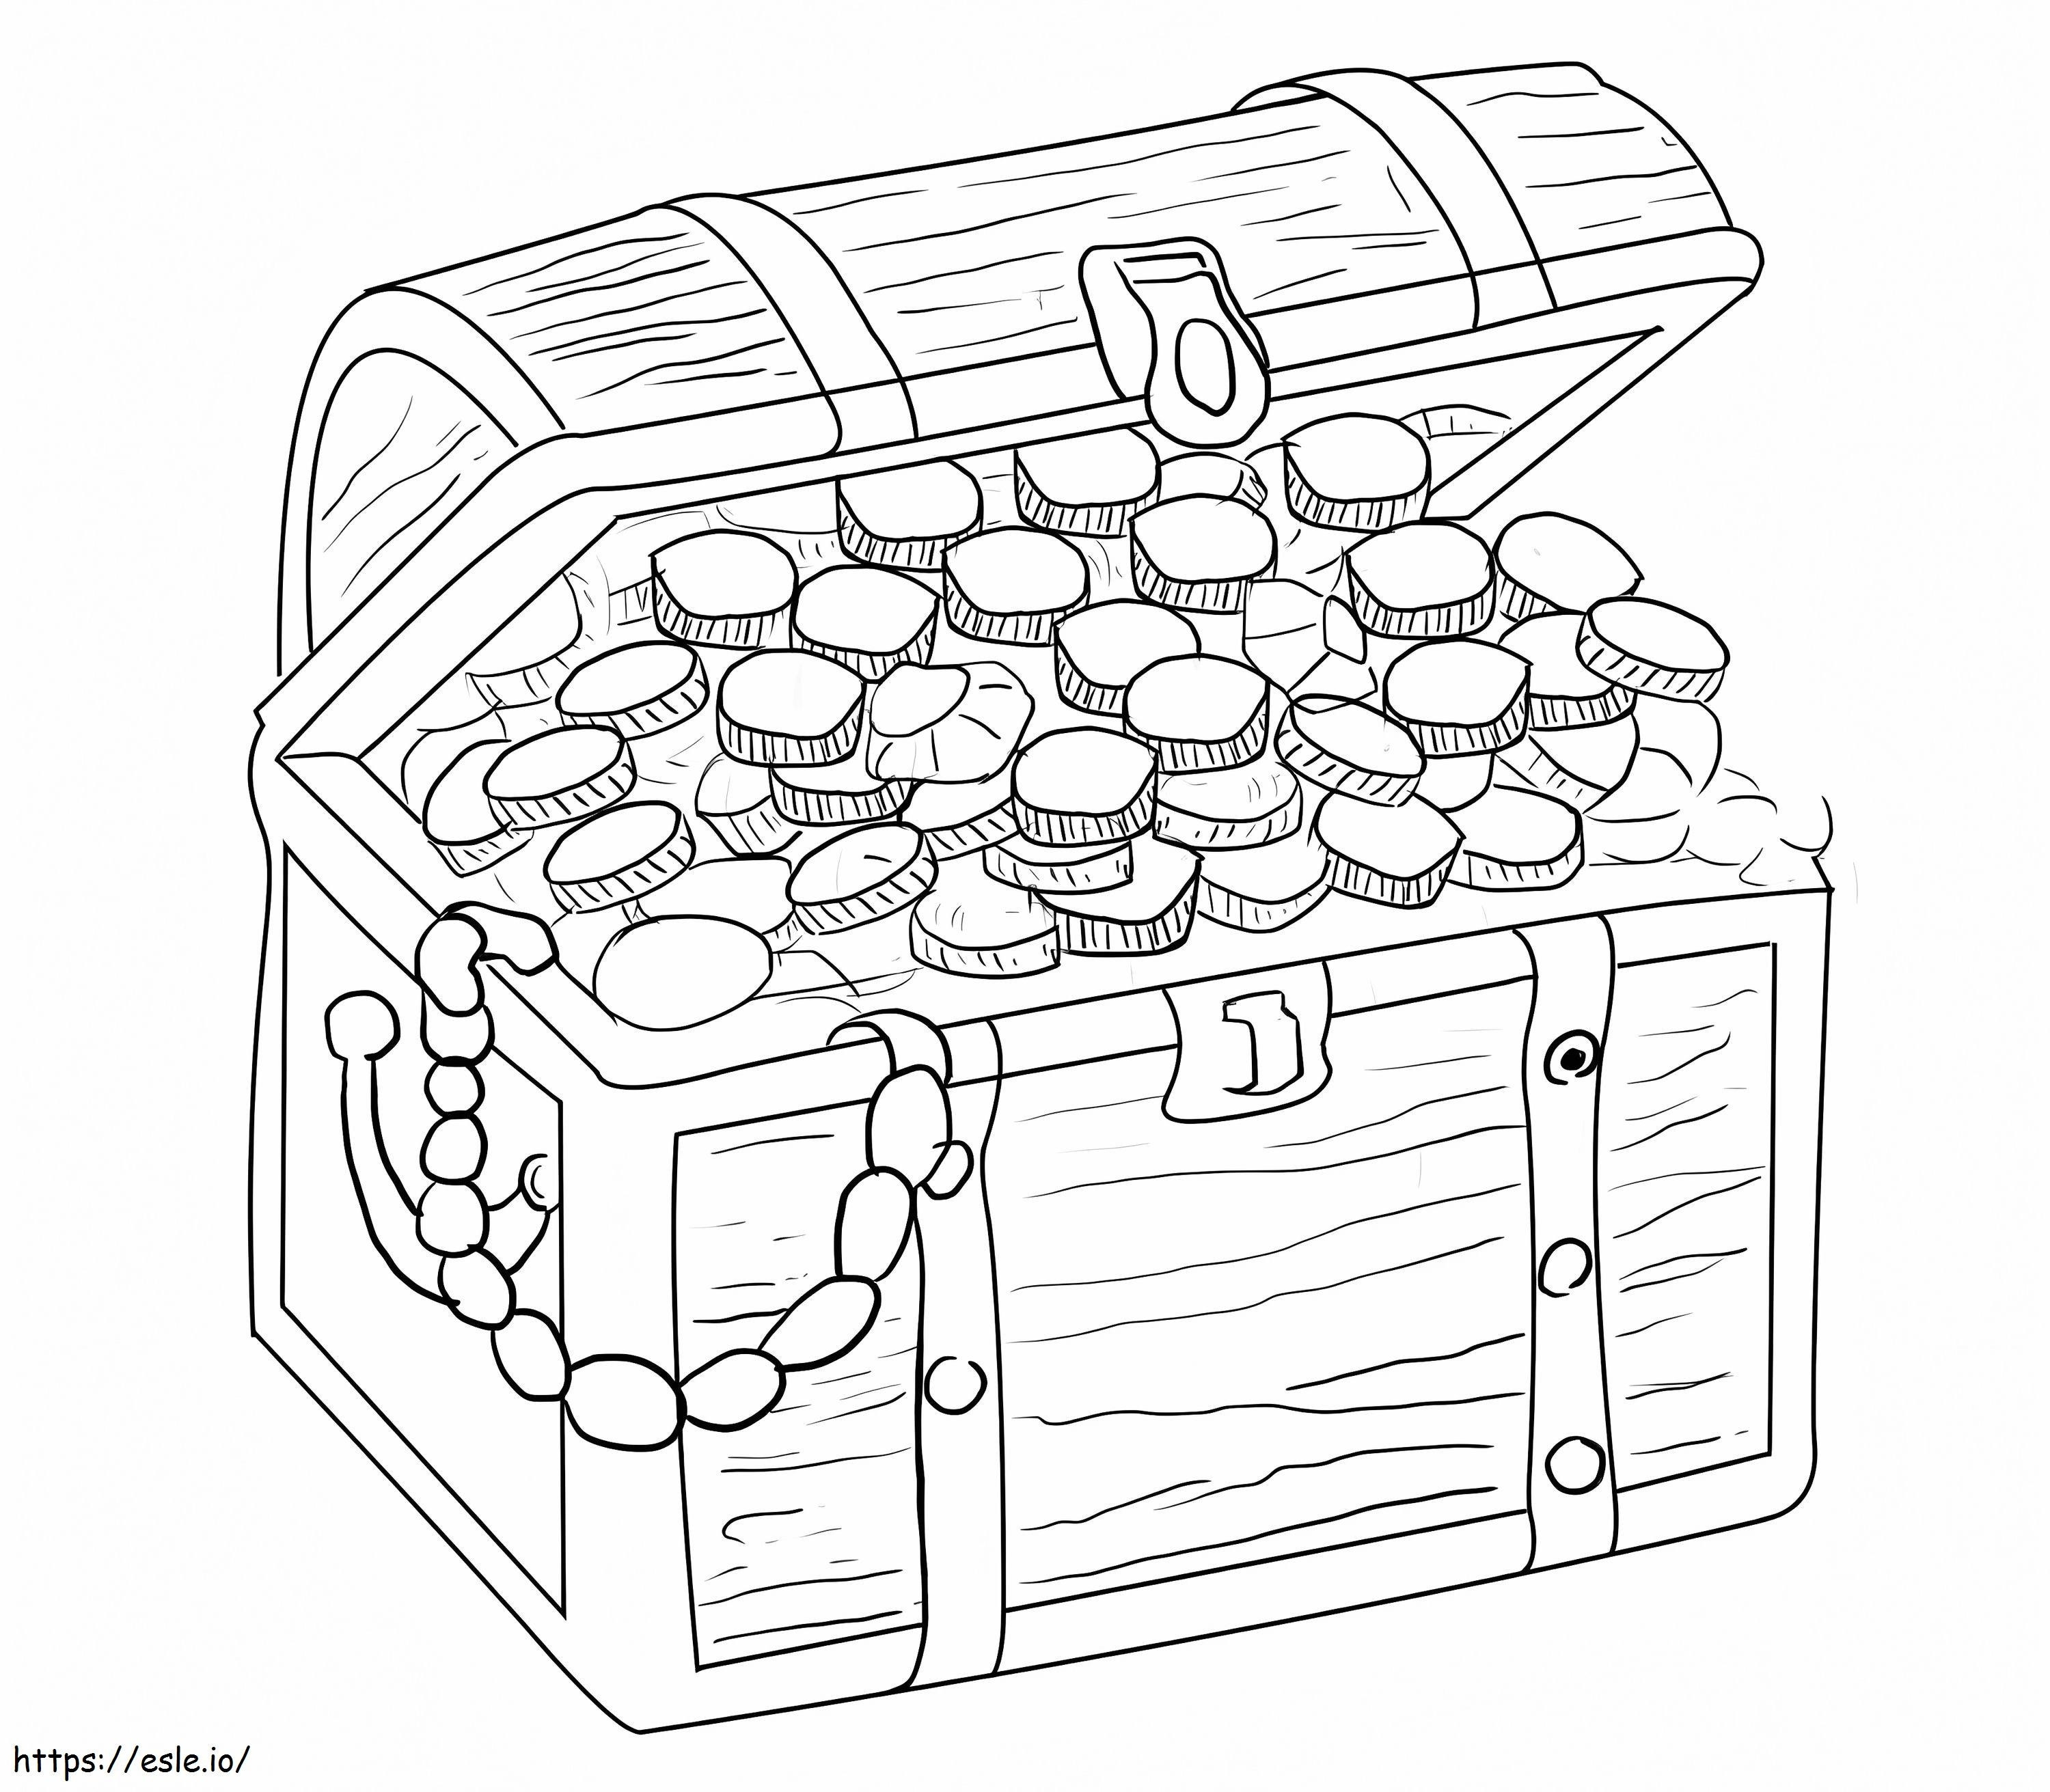 Treasure Chest 2 coloring page